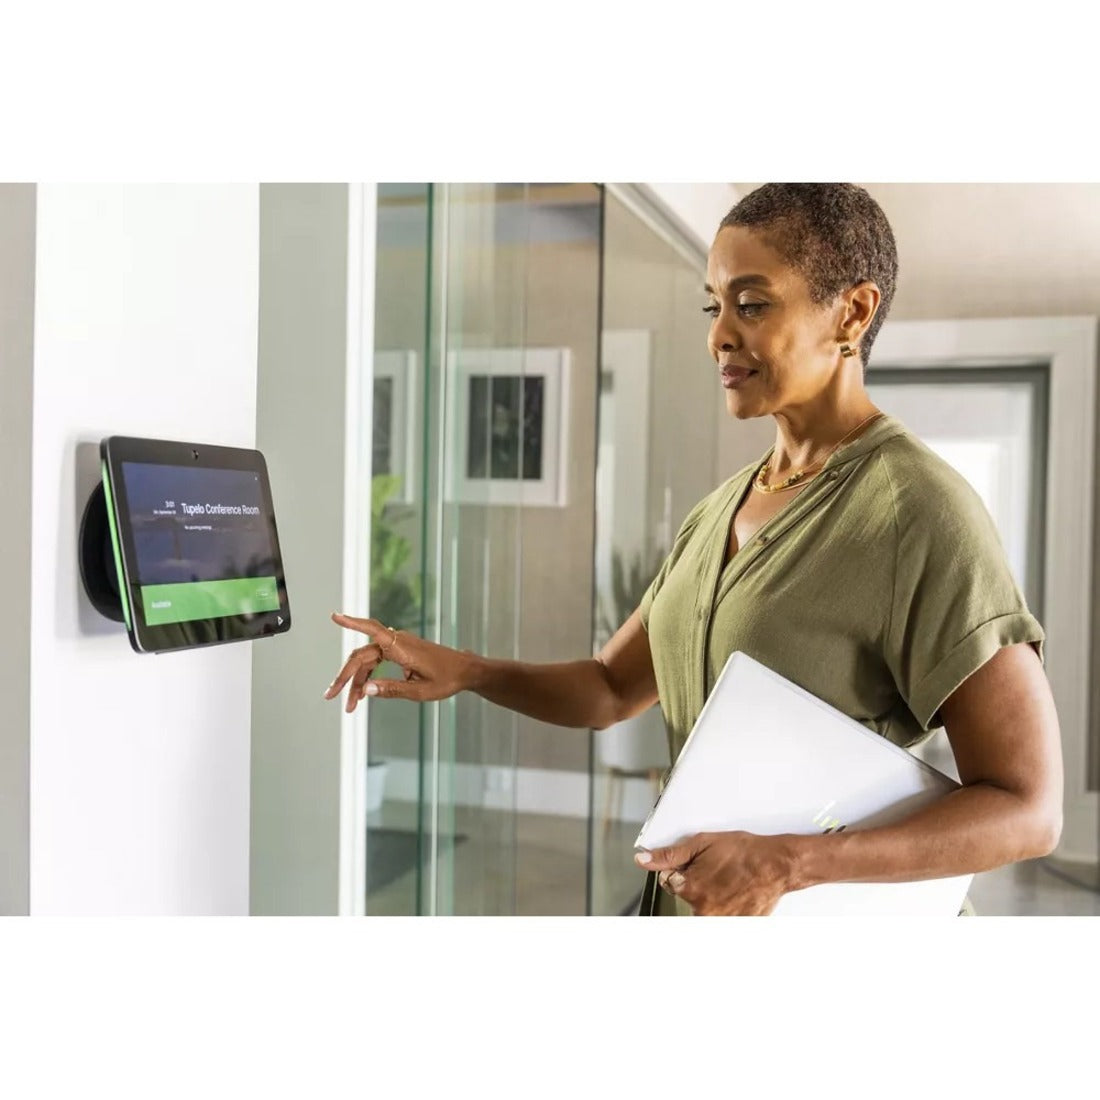 Poly 2200-37760-001 TC10 Video Conference Equipment, Multi-touch Screen, Kensington Lock